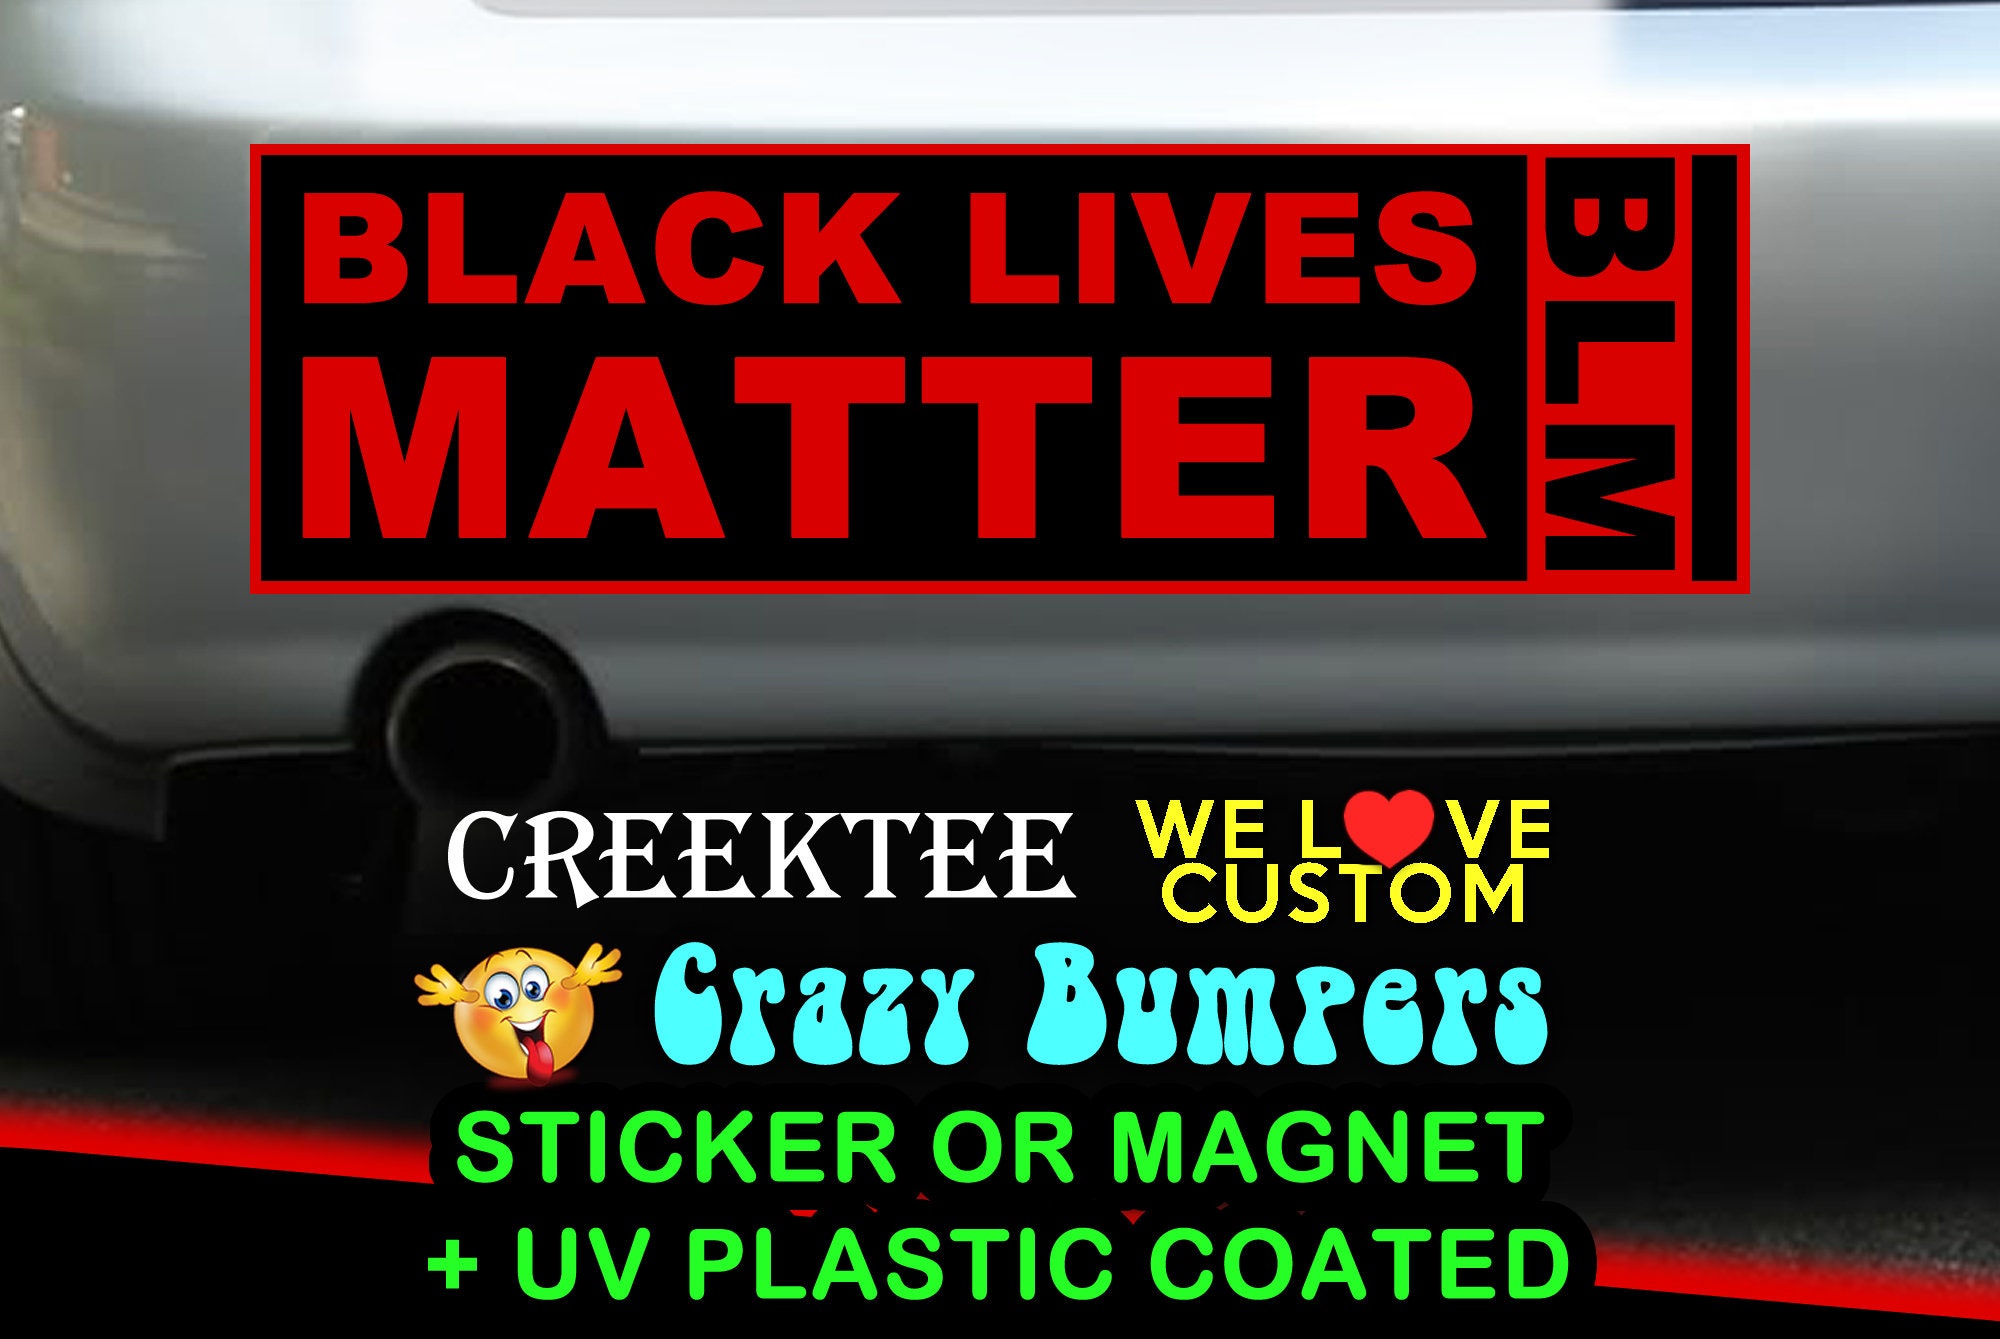 BLM Black Lives Matter with rising fist 9 x 2.7 or 10 x 3 Sticker Magnet or bumper sticker or bumper magnet